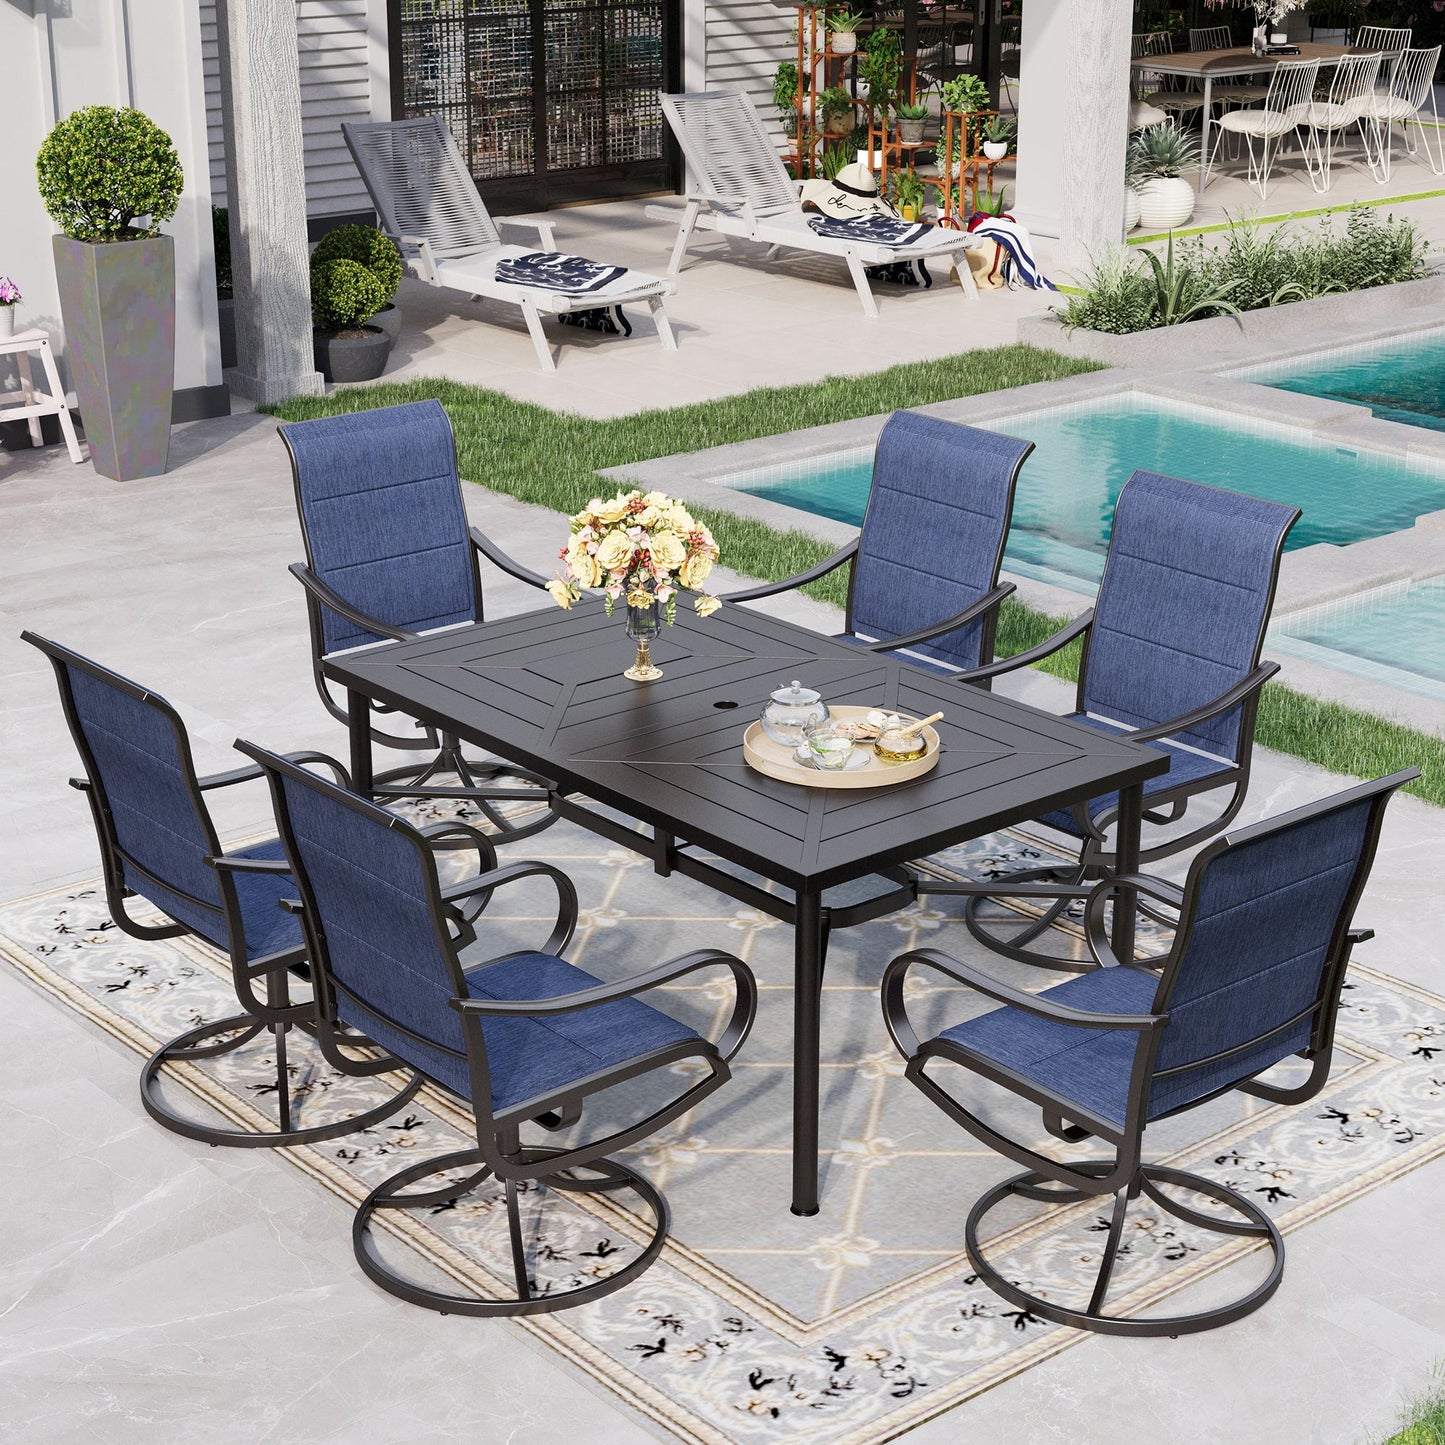 Sophia & William 7 Piece Outdoor Patio Dining Set Padded Textilene Chairs and Table Furniture Set